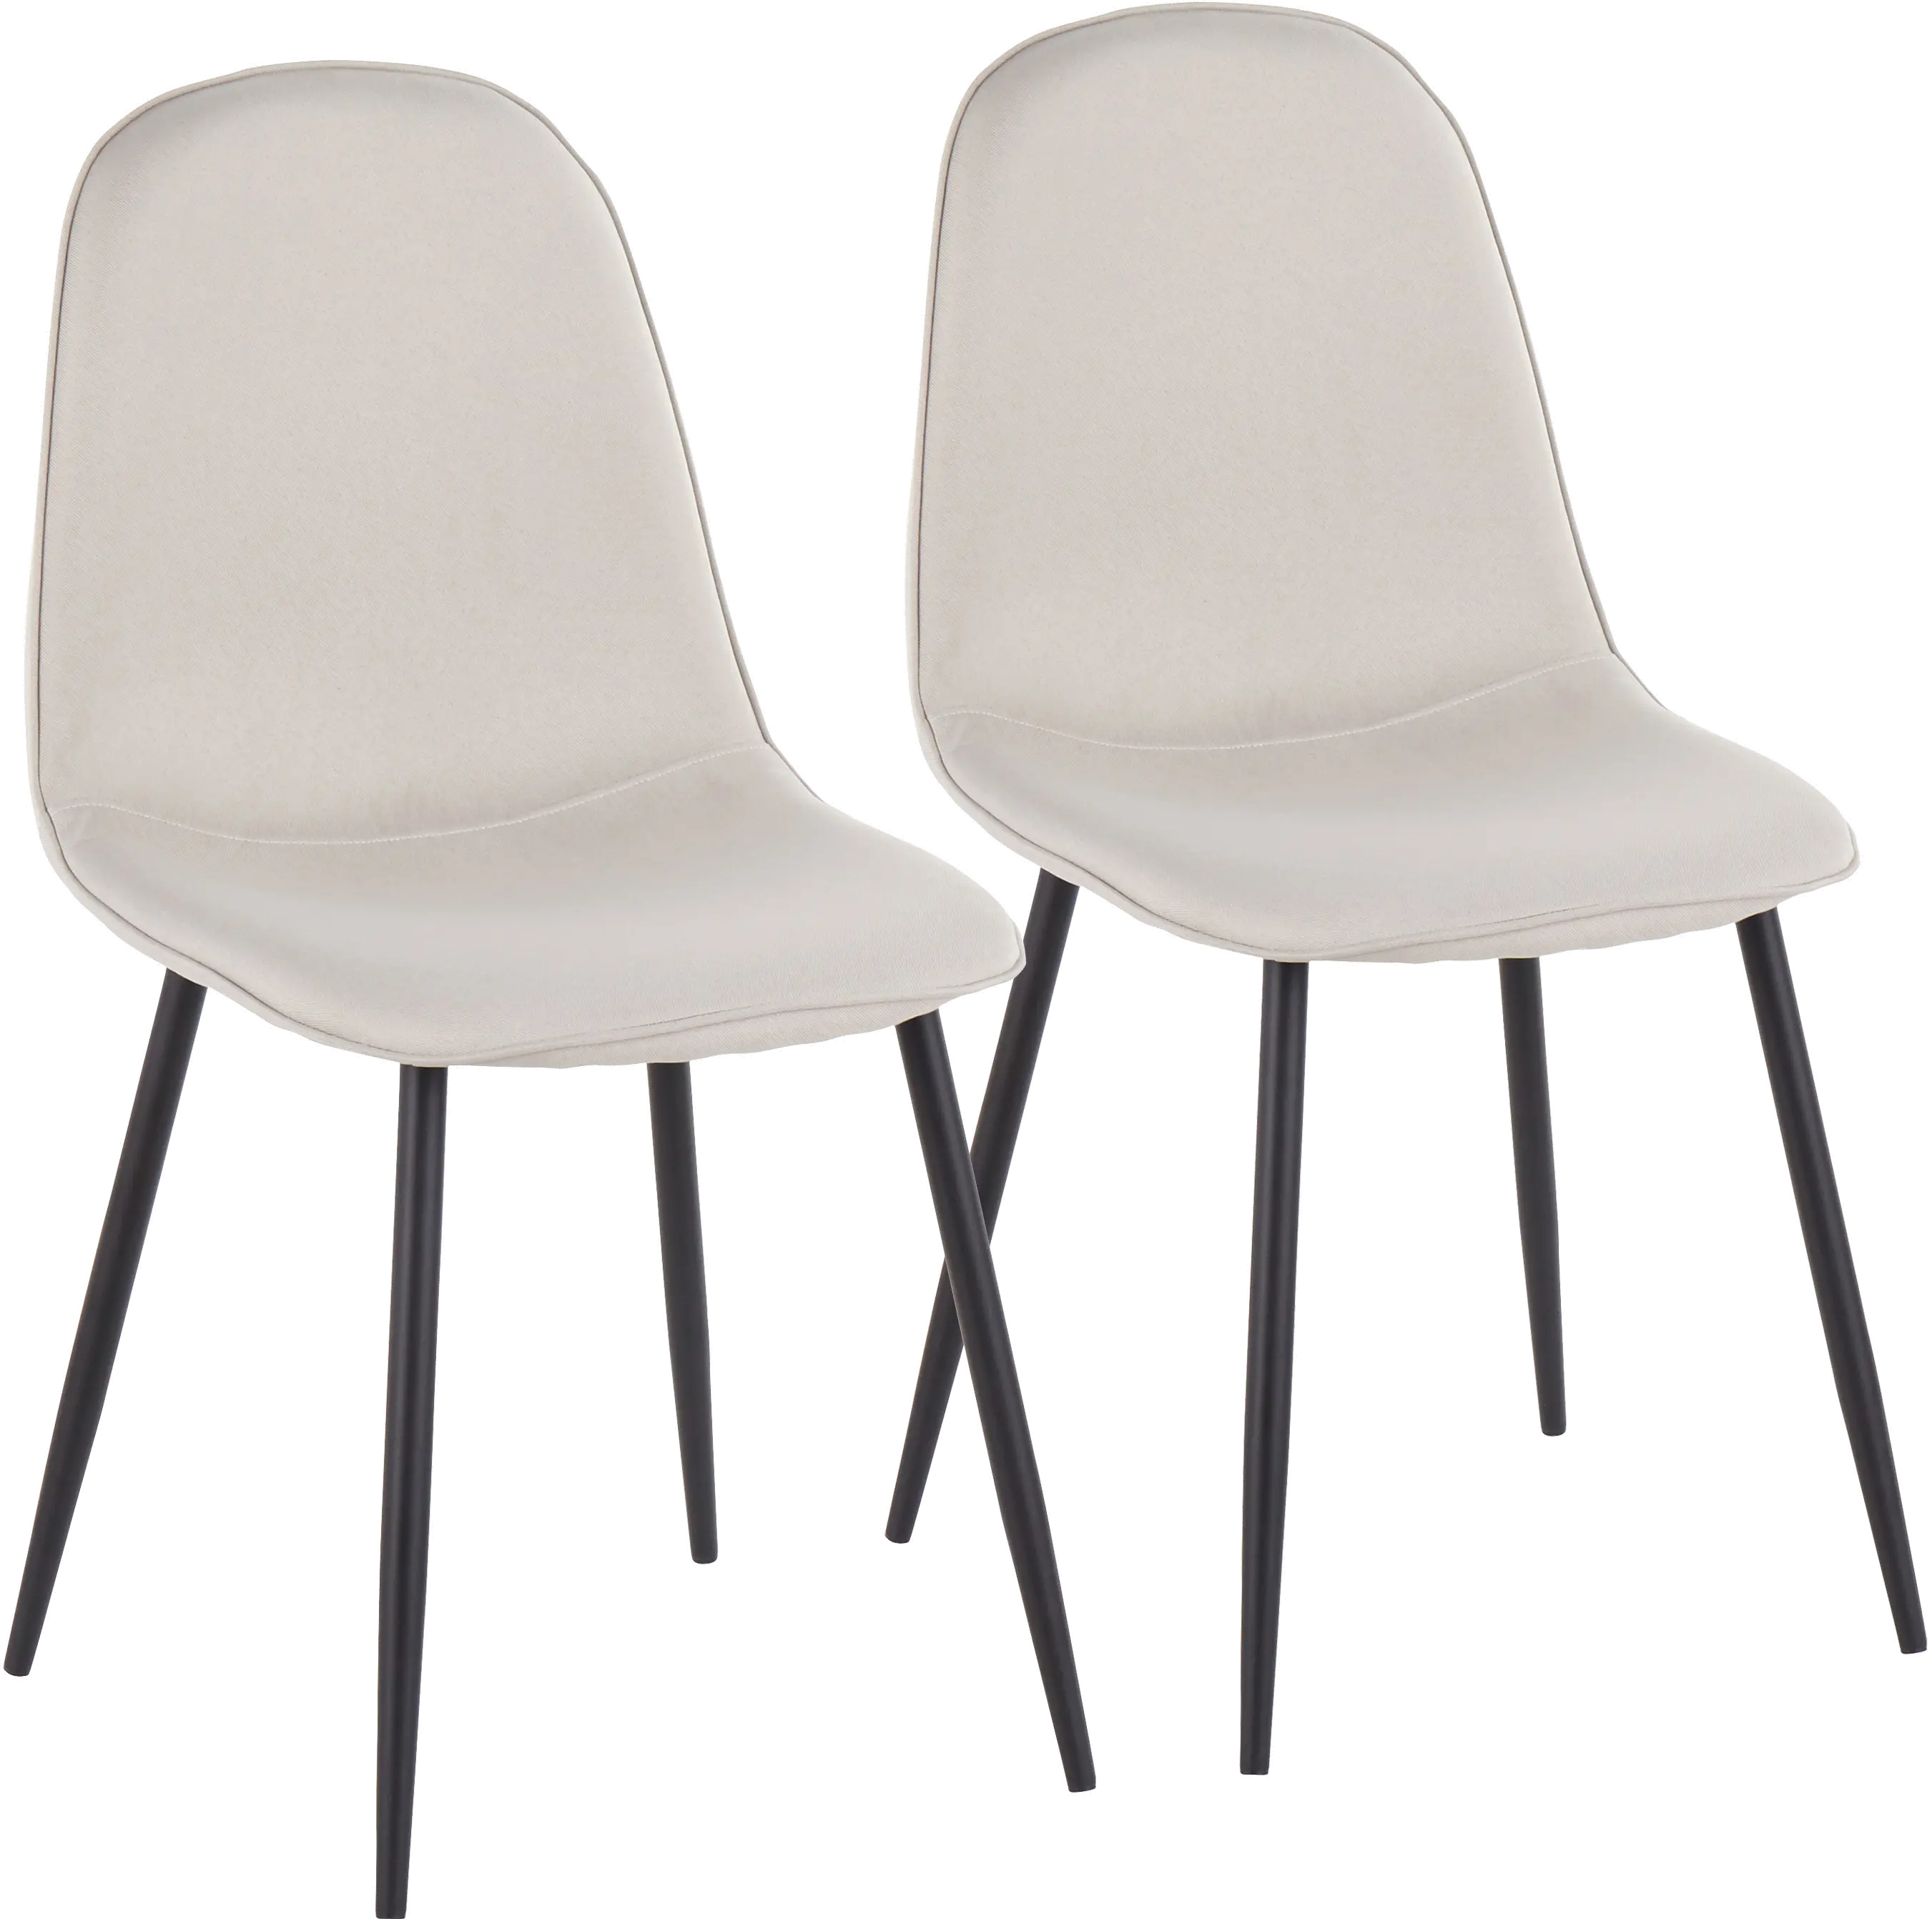 Contemporary Beige and Black Dining Room Chair (Set of 2) - Pebble